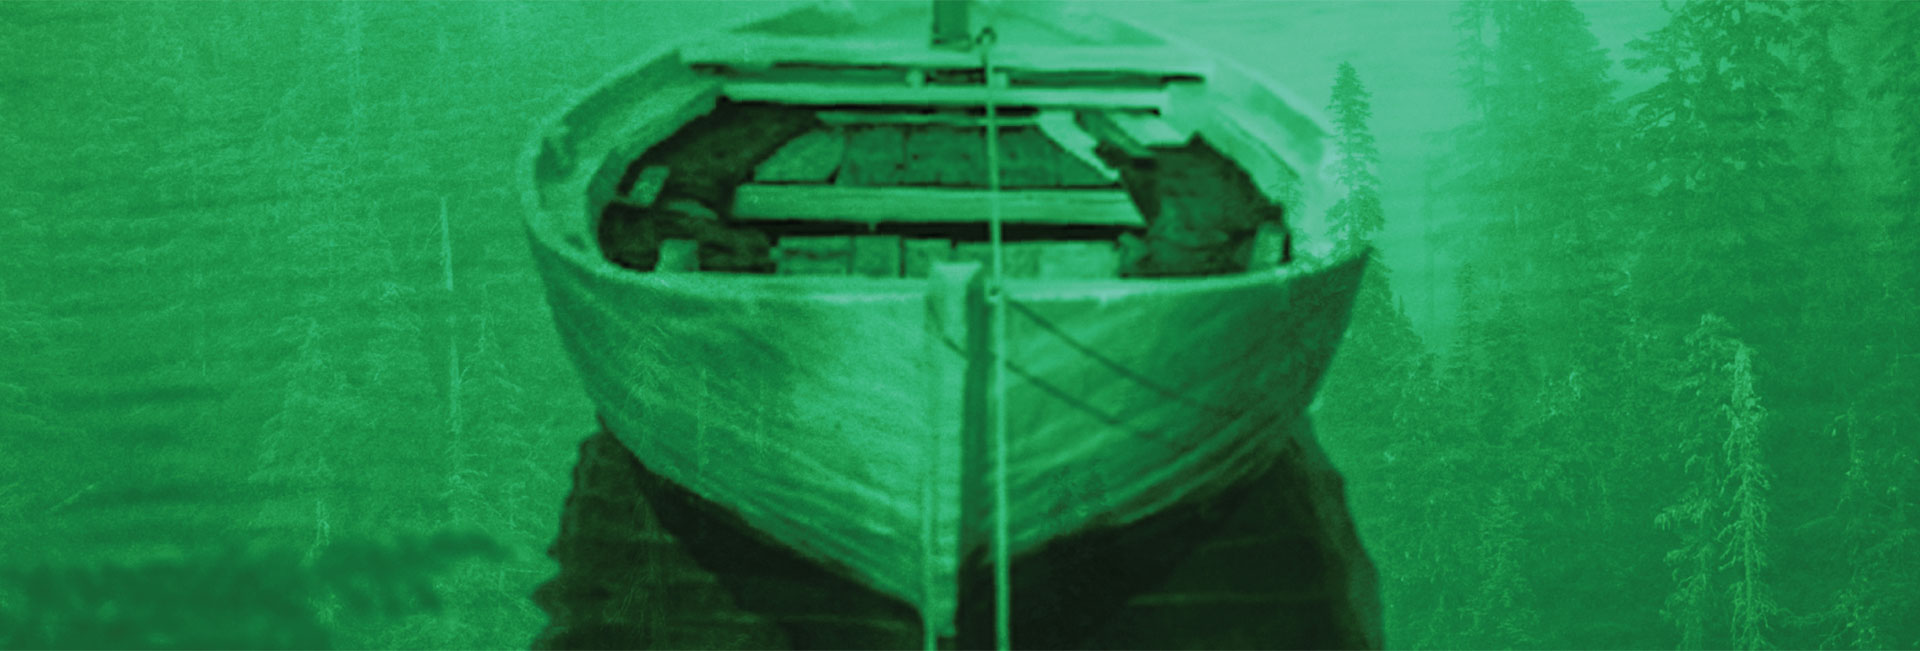 Boat with a green tint